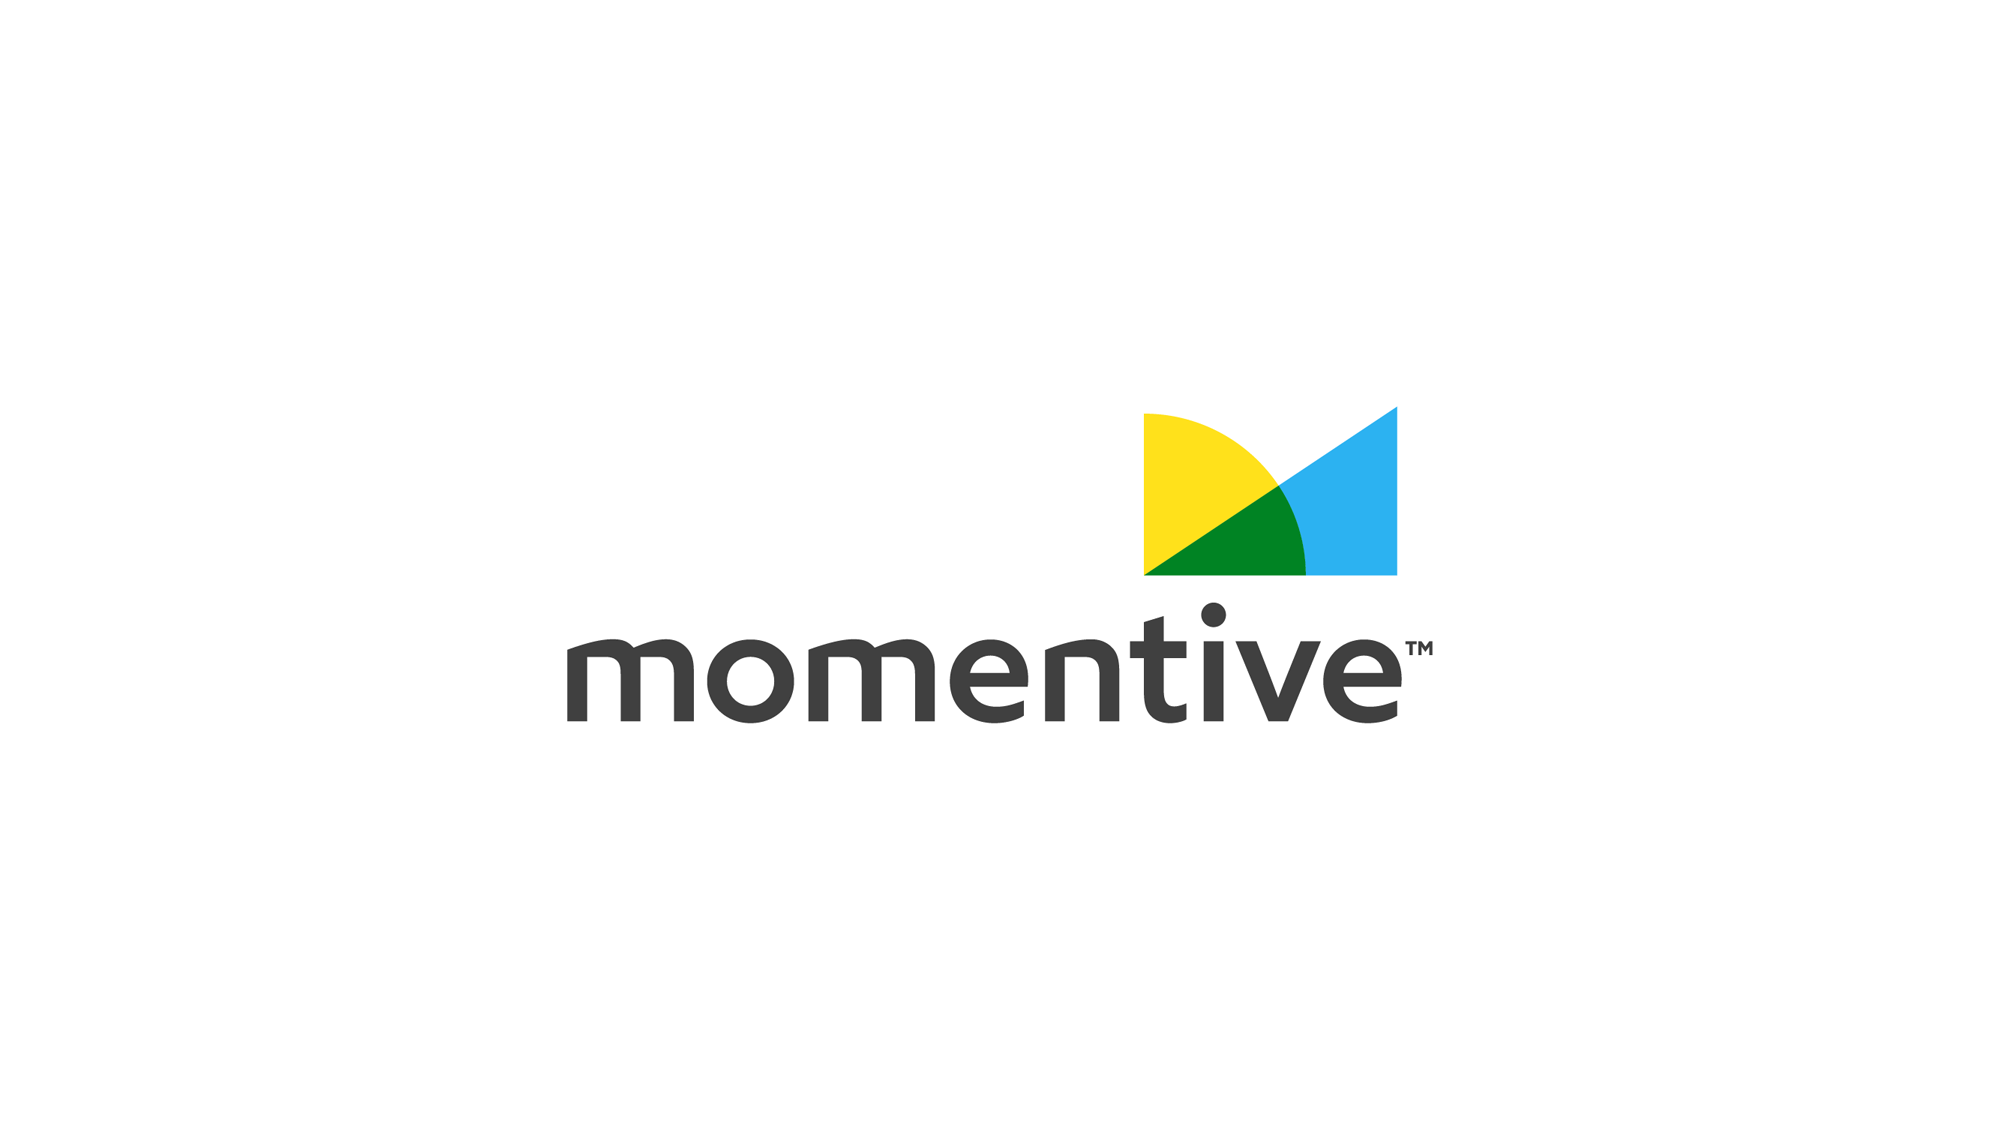 Brand New: New Name, Logo, and Identity for Momentive by Material